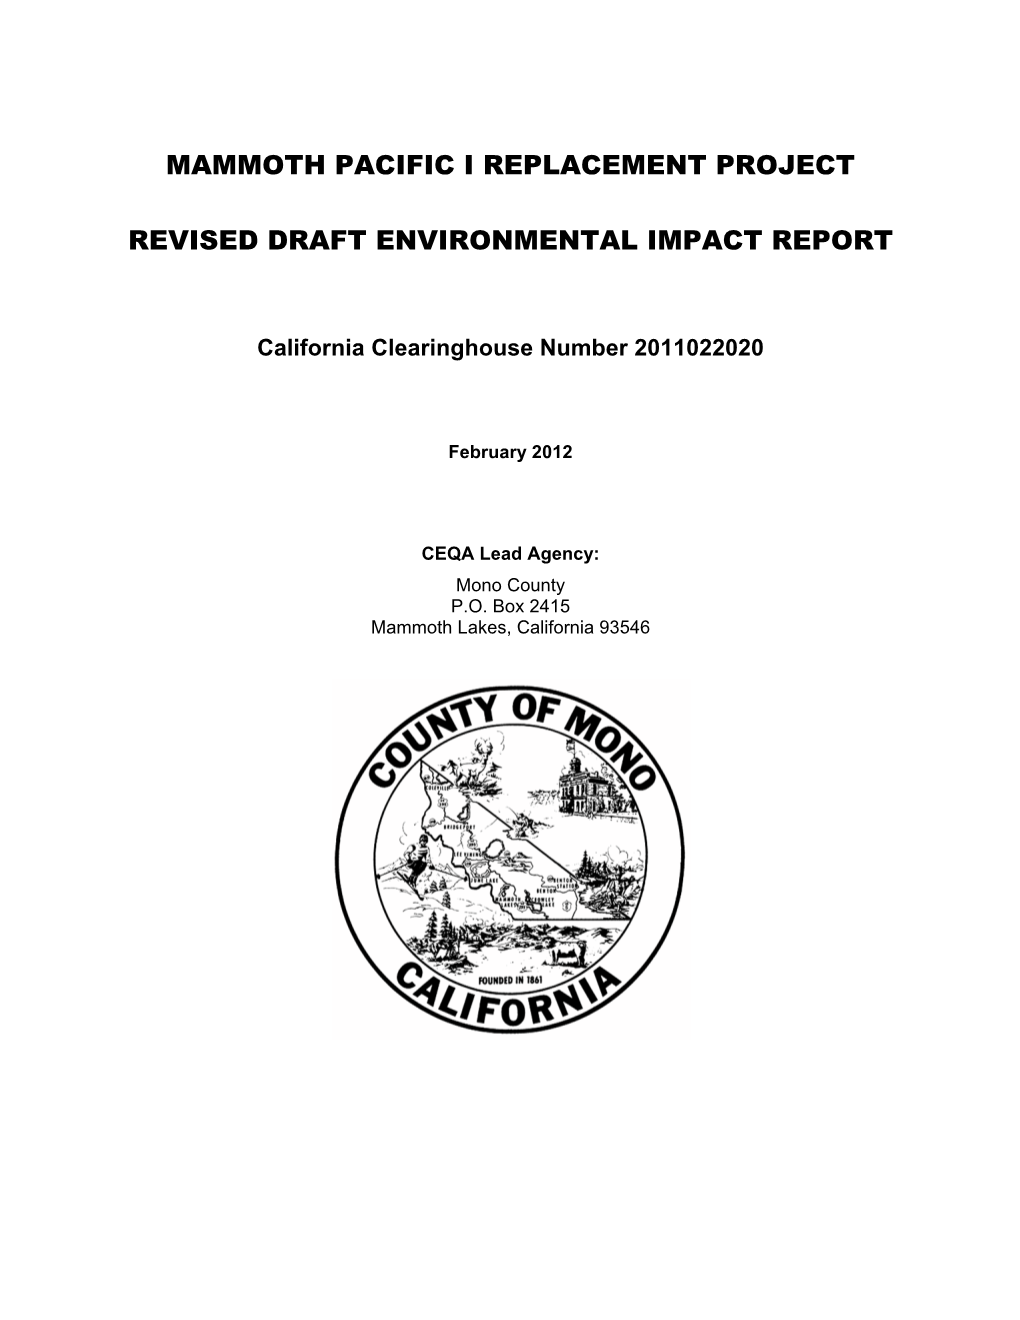 Mammoth Pacific I Replacement Project Revised Draft Environmental Impact Report